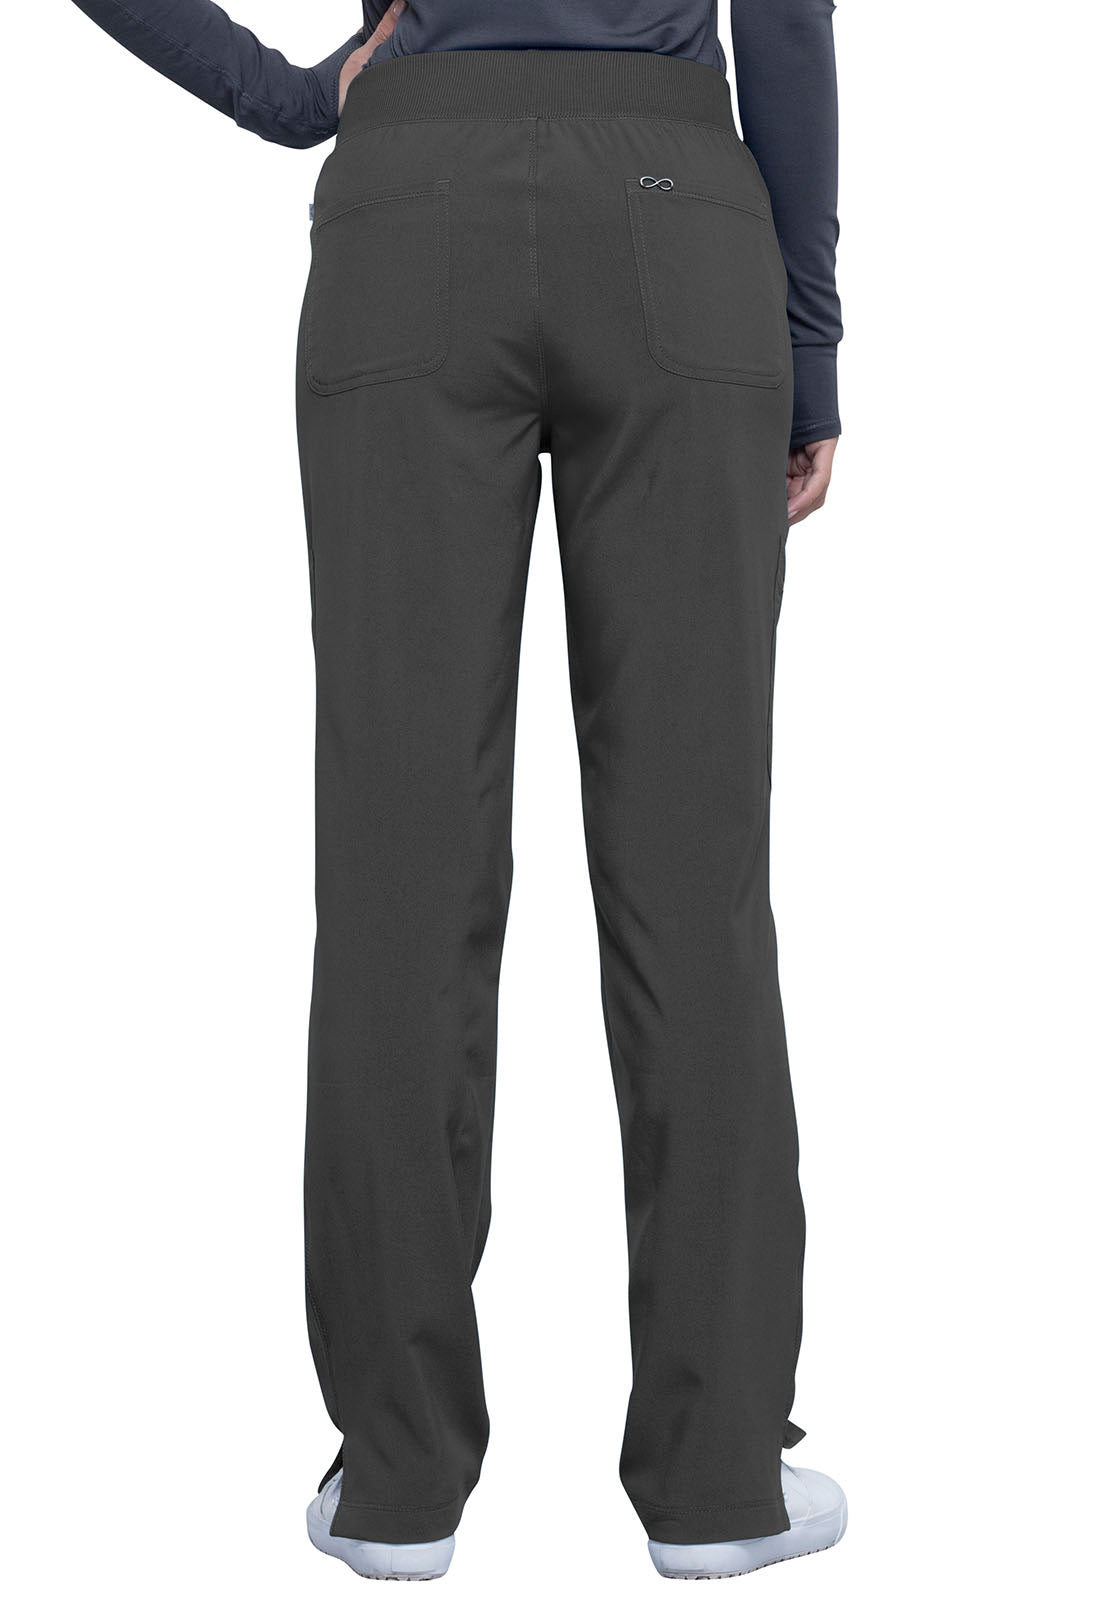 Cherokee Infinity CK065A Women's Mid Rise Scrub Pant pewter 